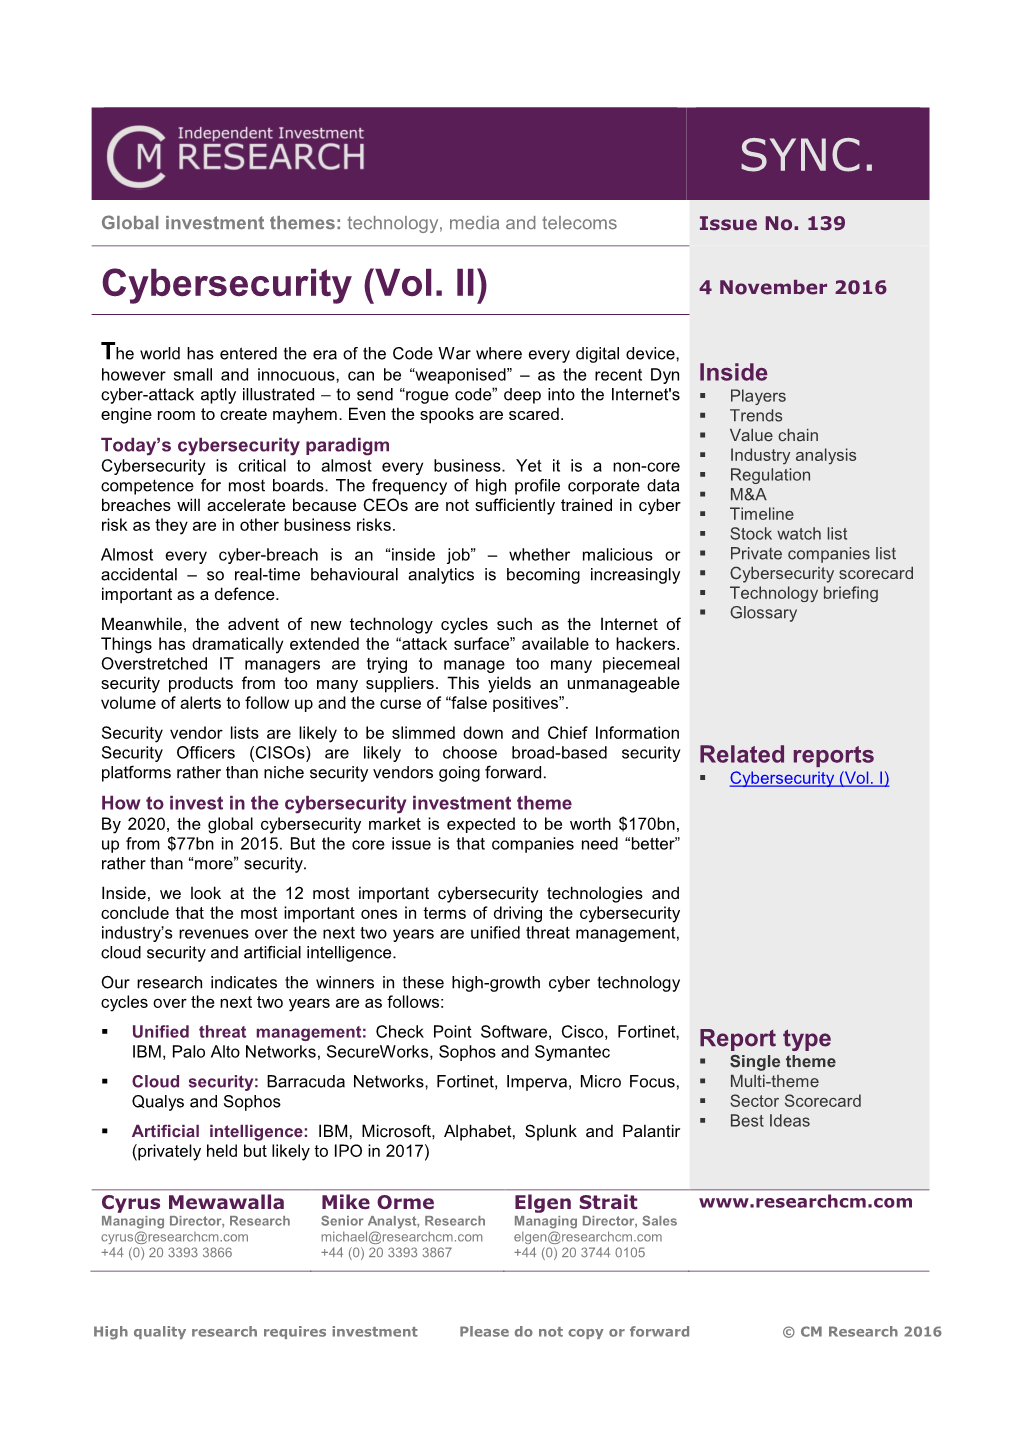 Cybersecurity (Vol